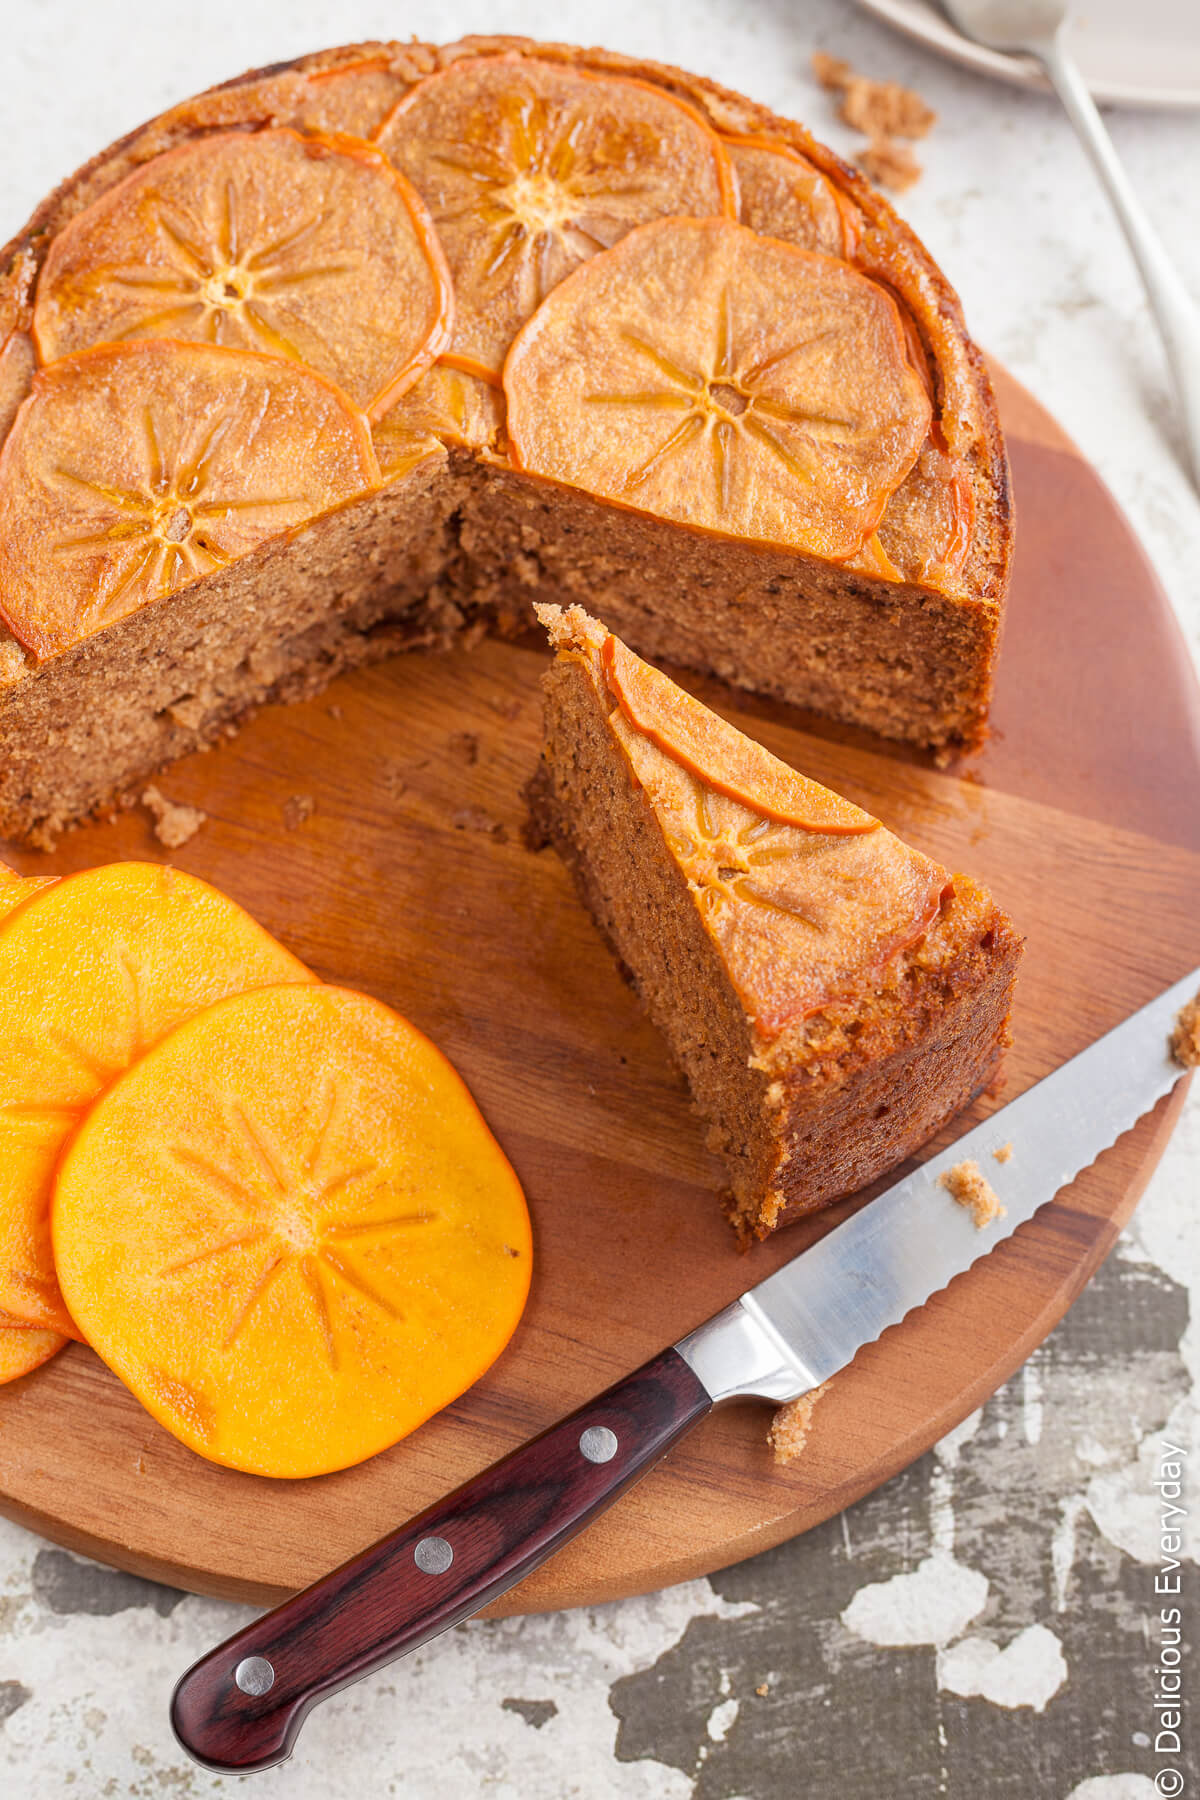 This gorgeous spiced upside down persimmon cake topped with finely sliced persimmon in maple syrup is a great introduction to persimmons. | Click for the recipe